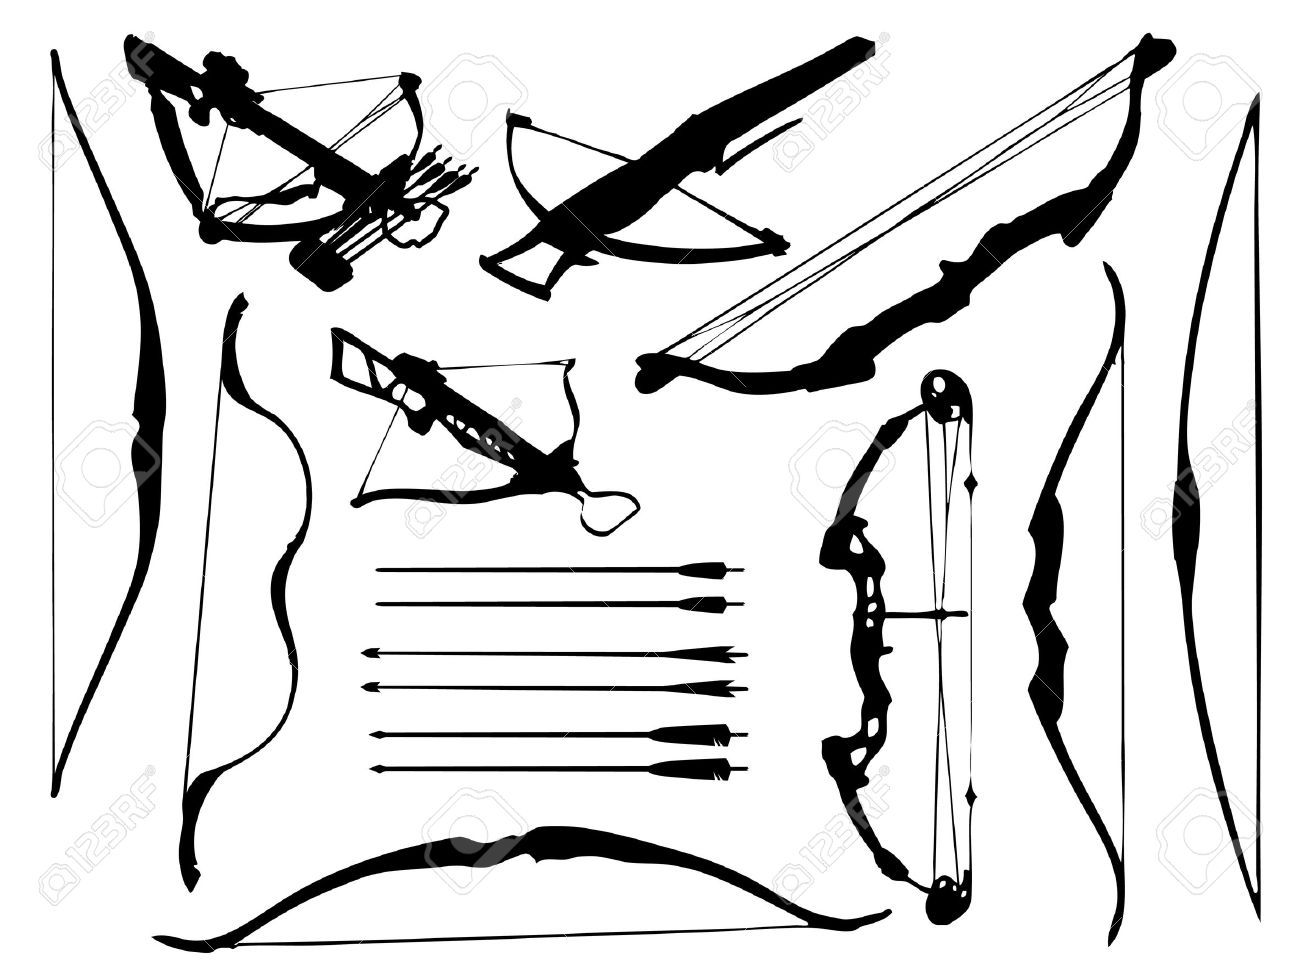 Crossbow clipart #19, Download drawings